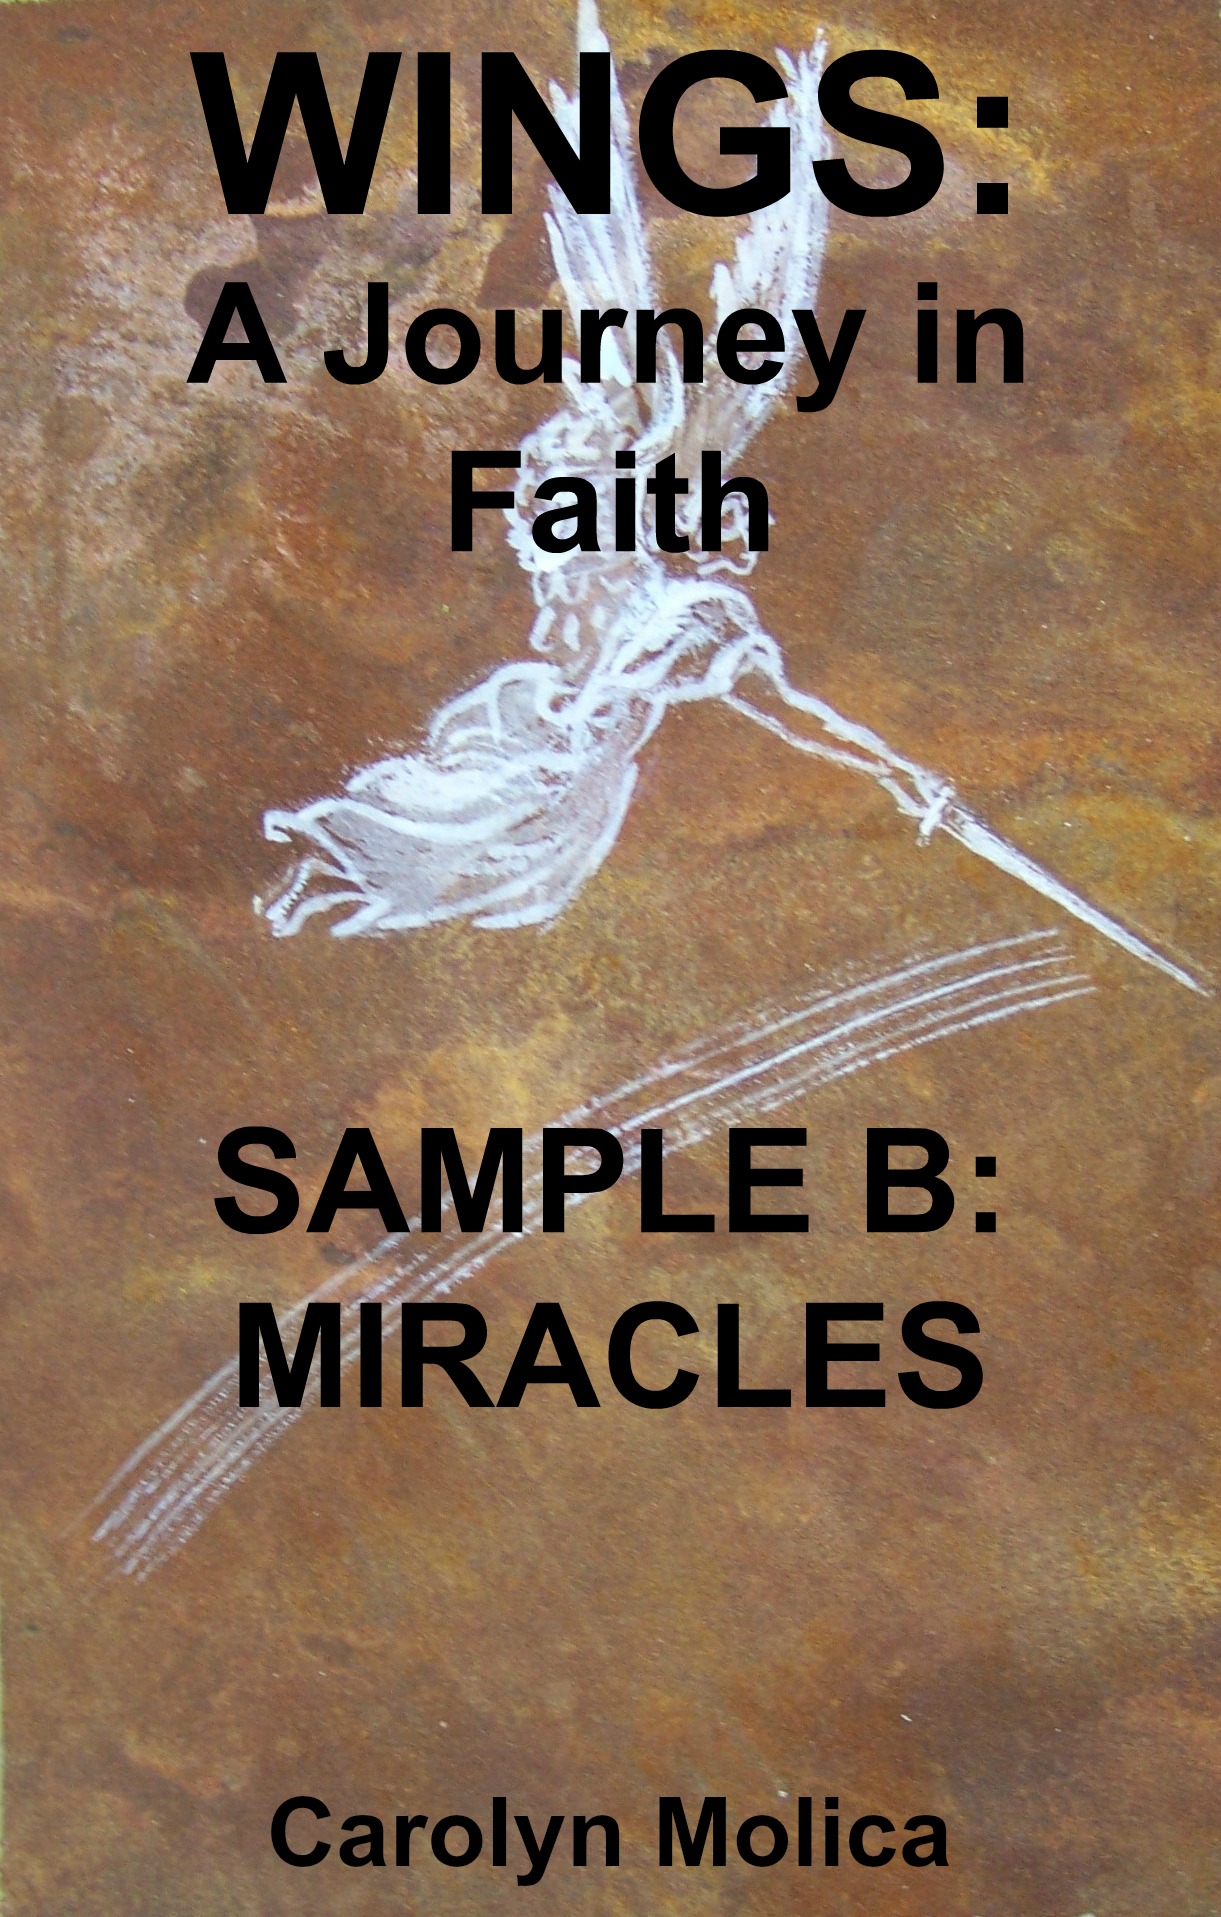 FREE: WINGS: A Journey in Faith Sample B – Miracles by Carolyn Molica